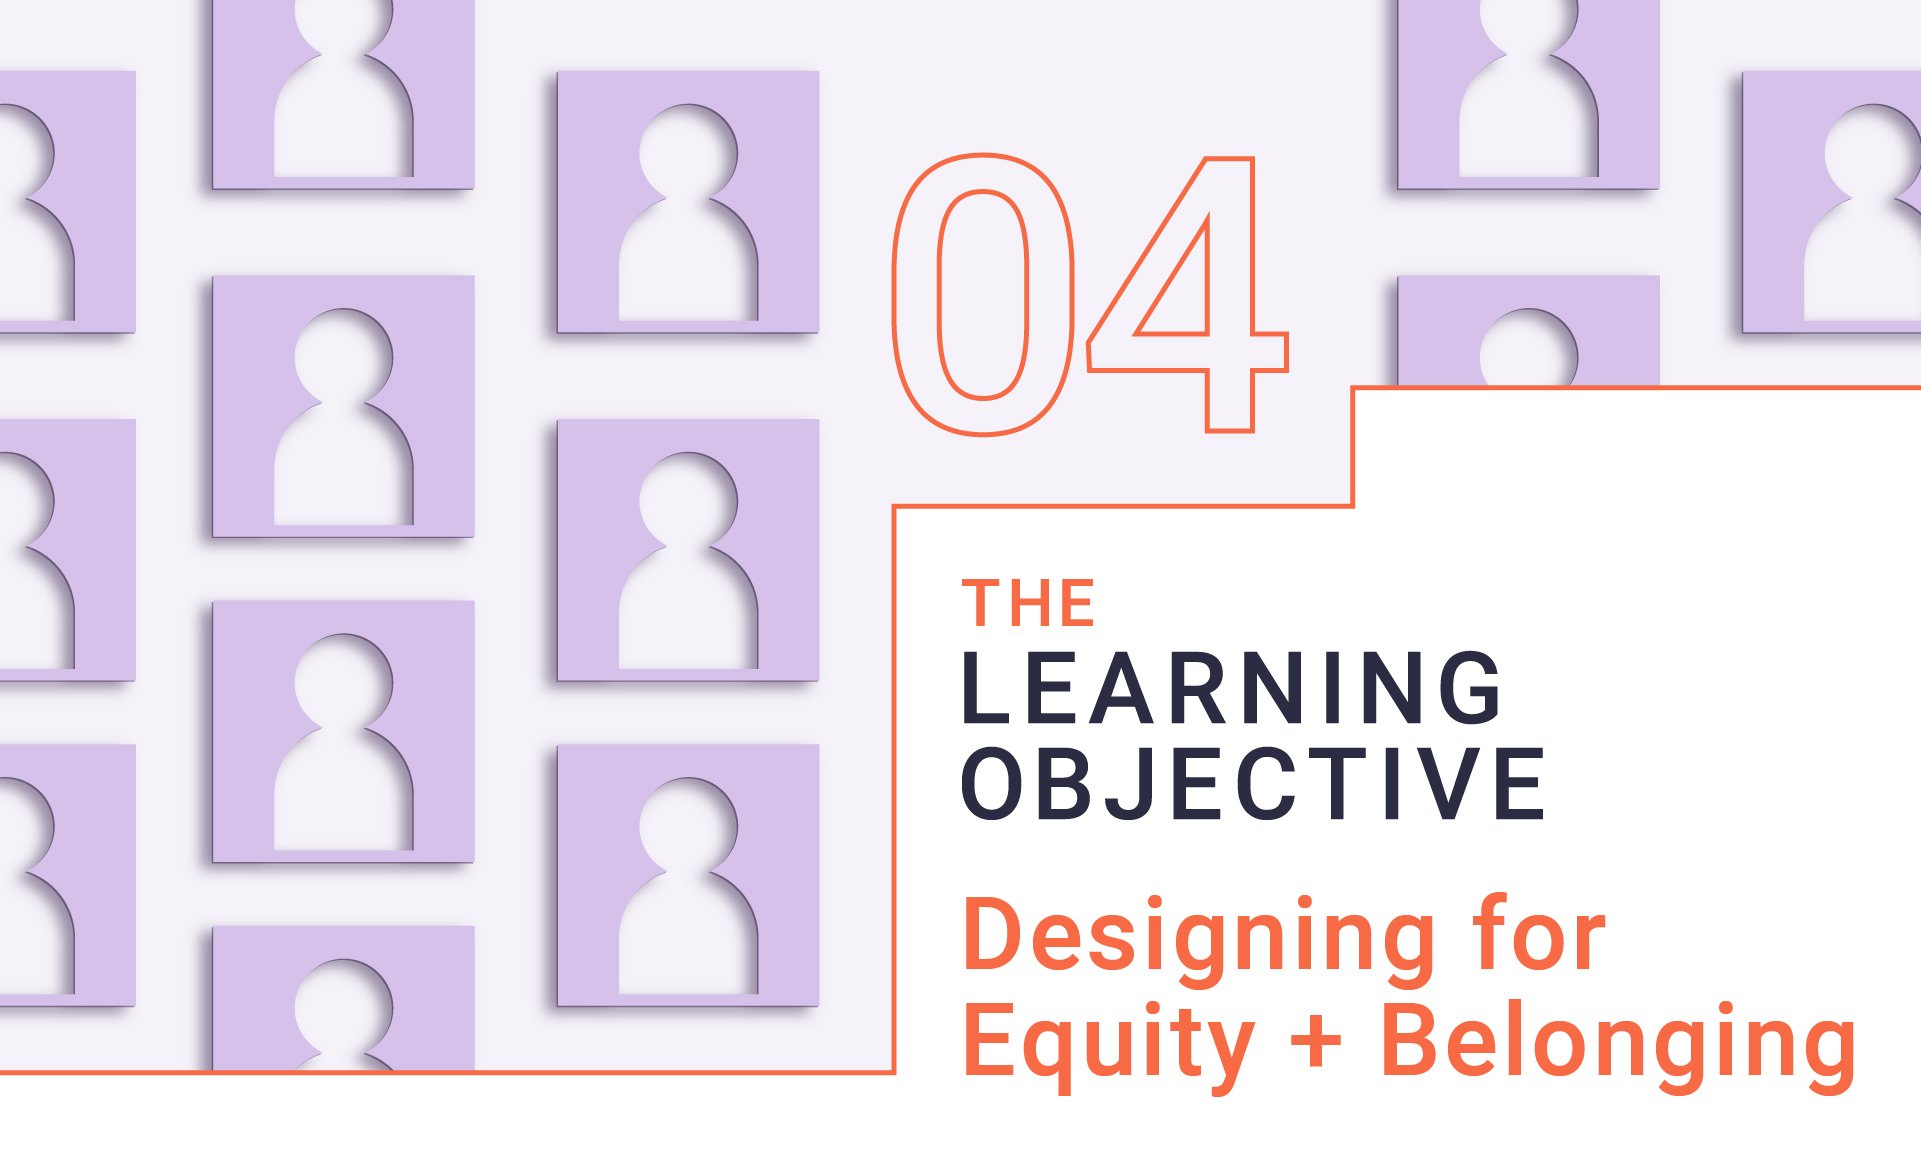 ThinkLab The Learning Objective CEU Podcast for Designing for Equity & Belonging 